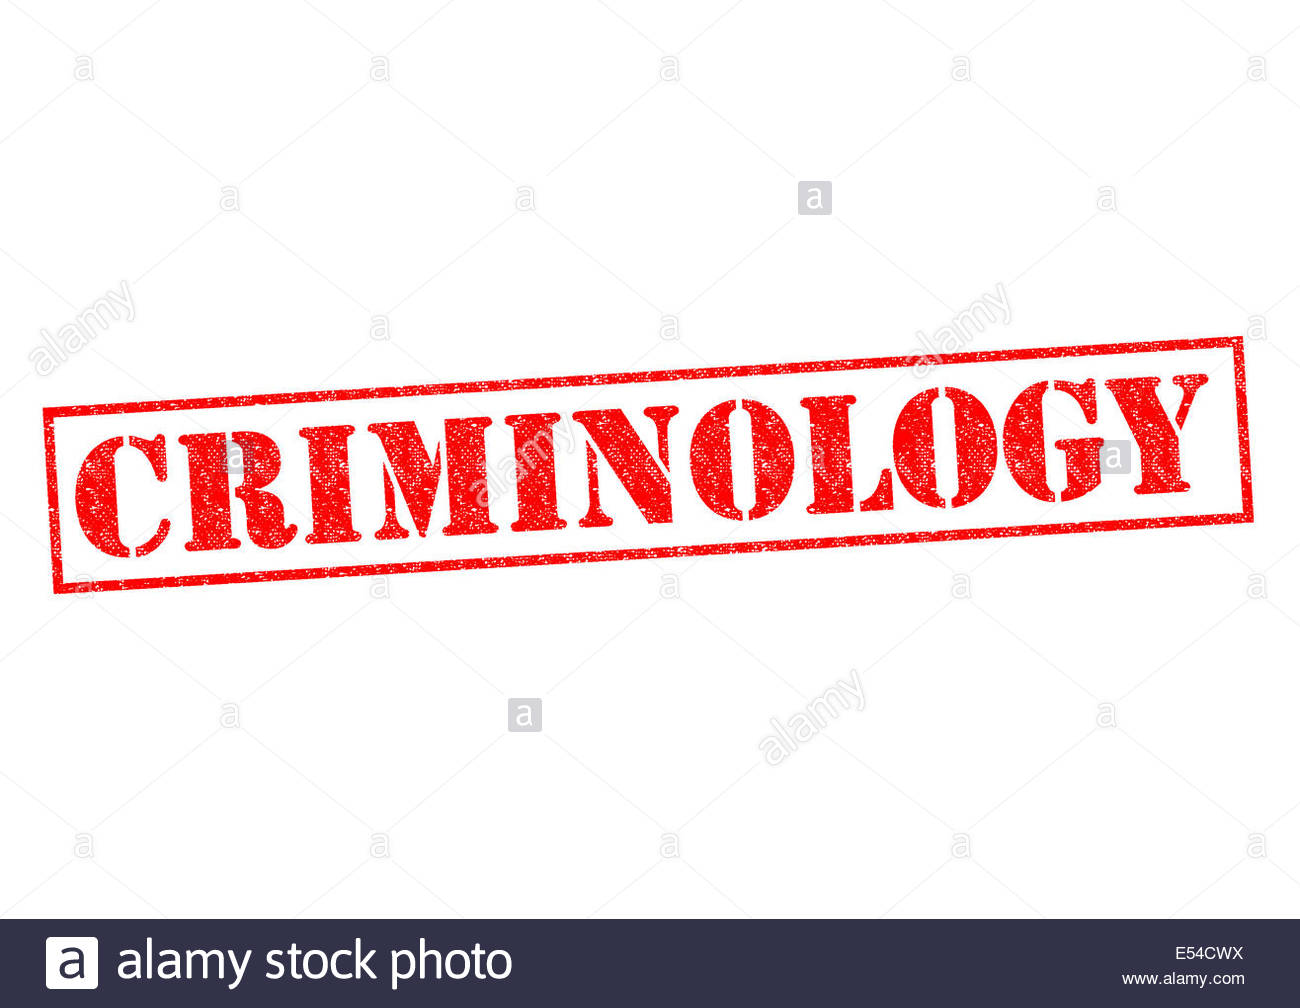 Criminology Red Rubber Stamp Over A White Background Stock Photo